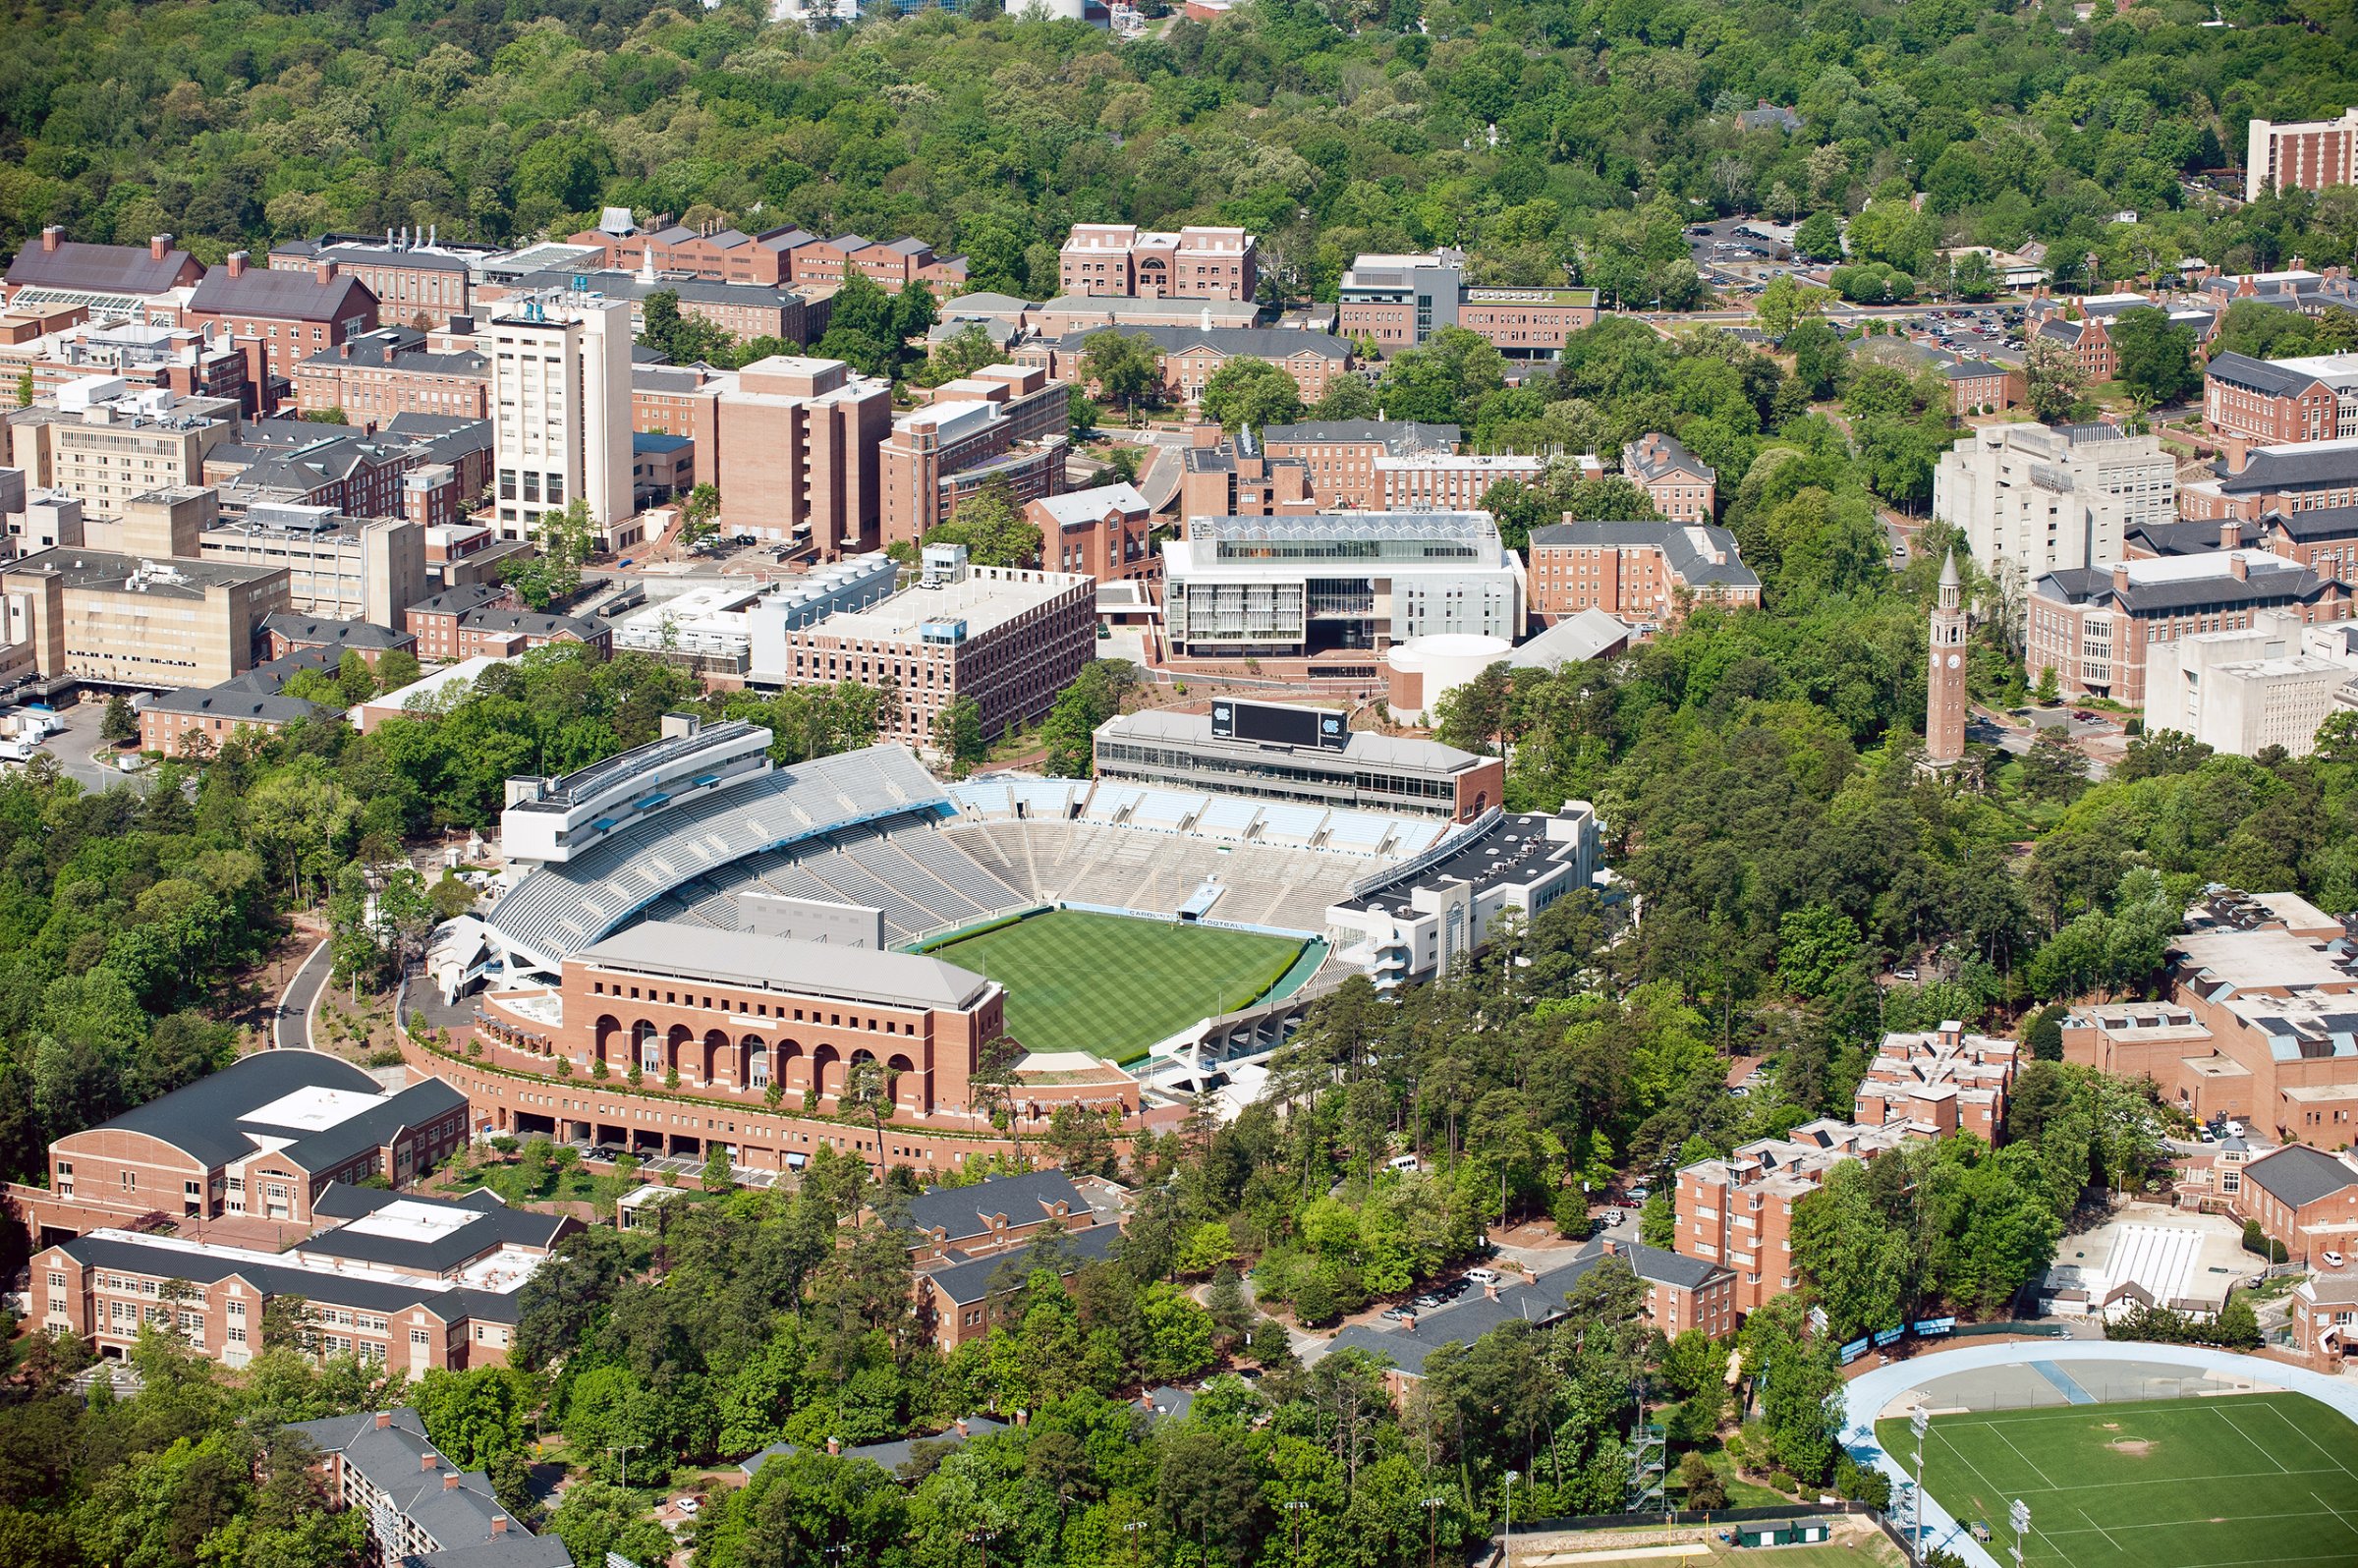 An aerial view of the University of North Carolina campus in Chapel Hill, North Carolina on April 21, 2013.